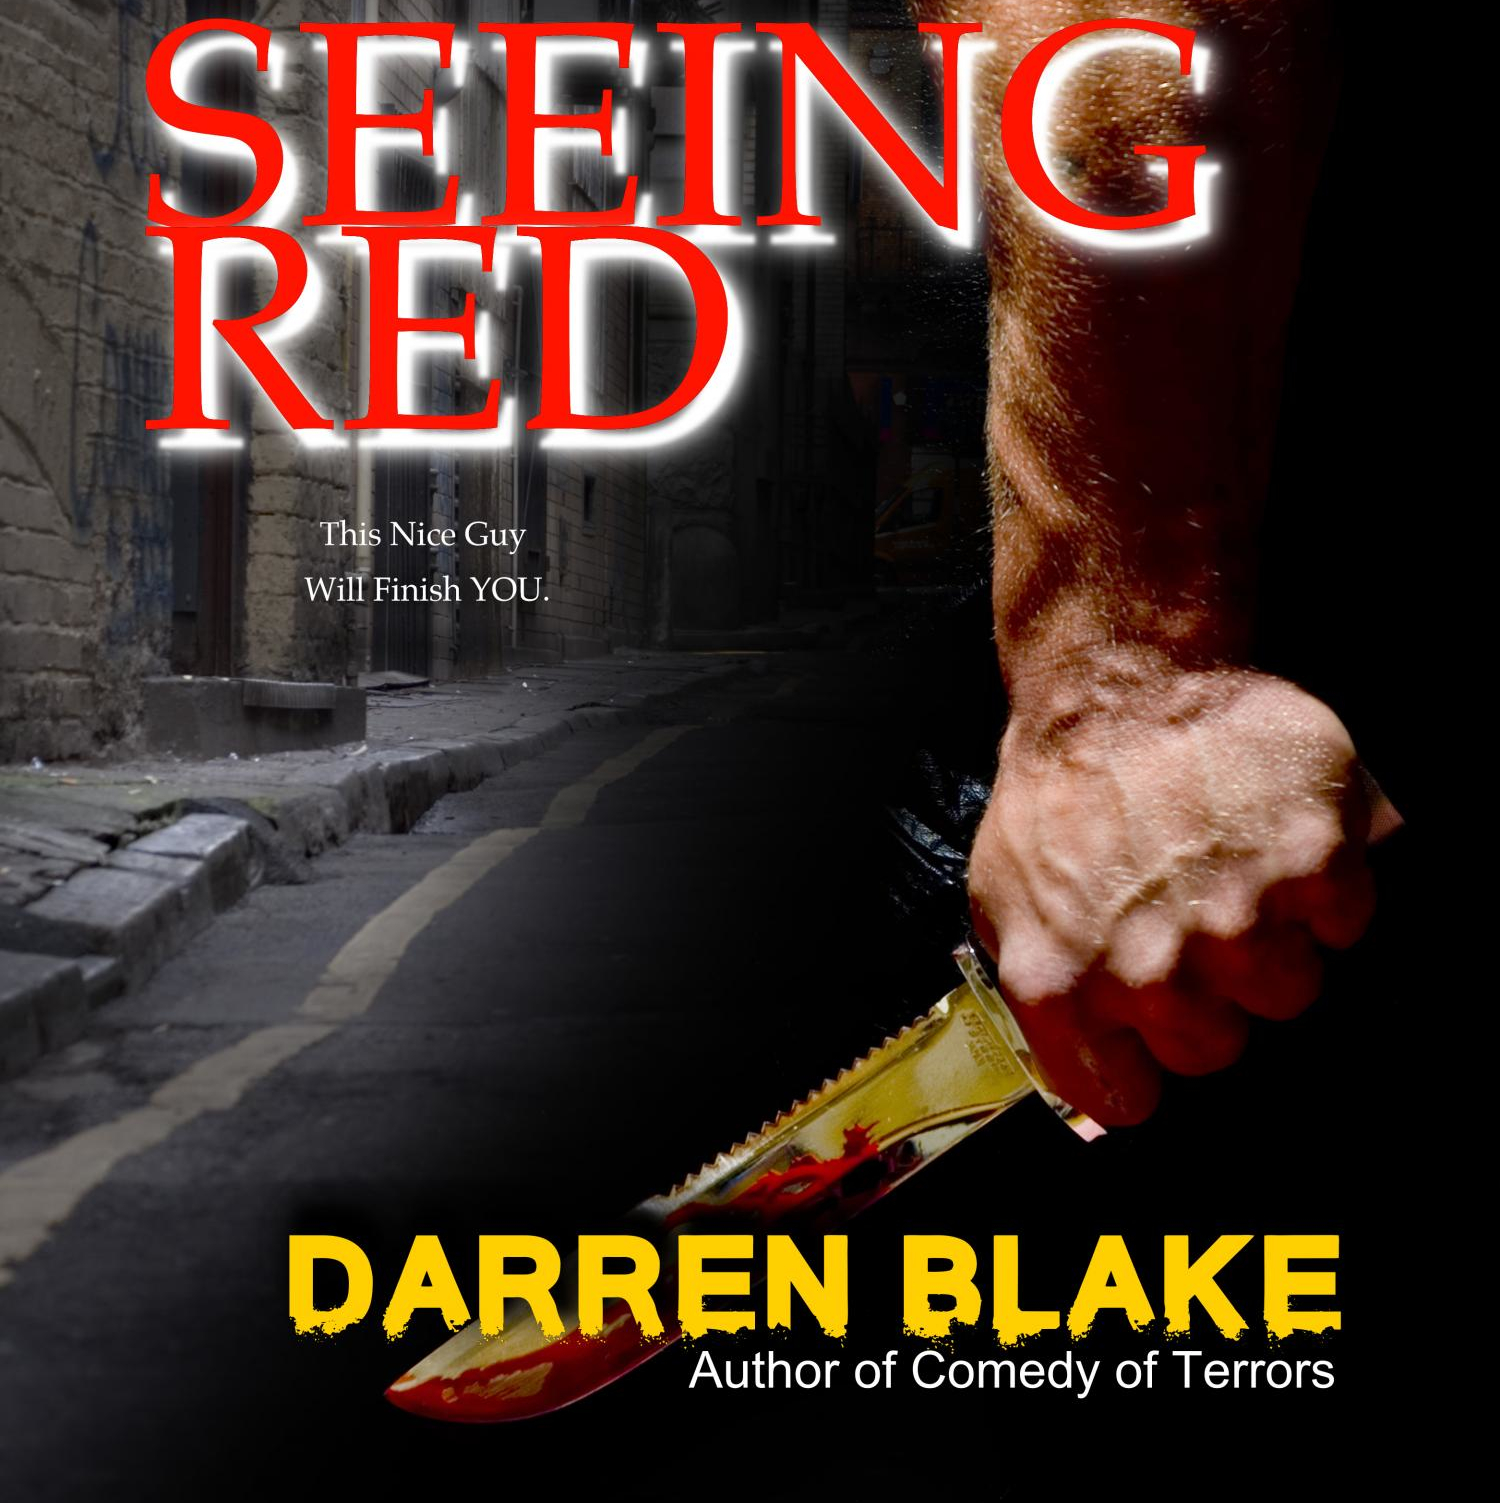 audio cover for Seeing Red, by Darren Blake, narrated by Google AI auto-narration. The image is of an arm holding a knife with streaks of blood on it. There is an urban-like background shrouded in shadow.